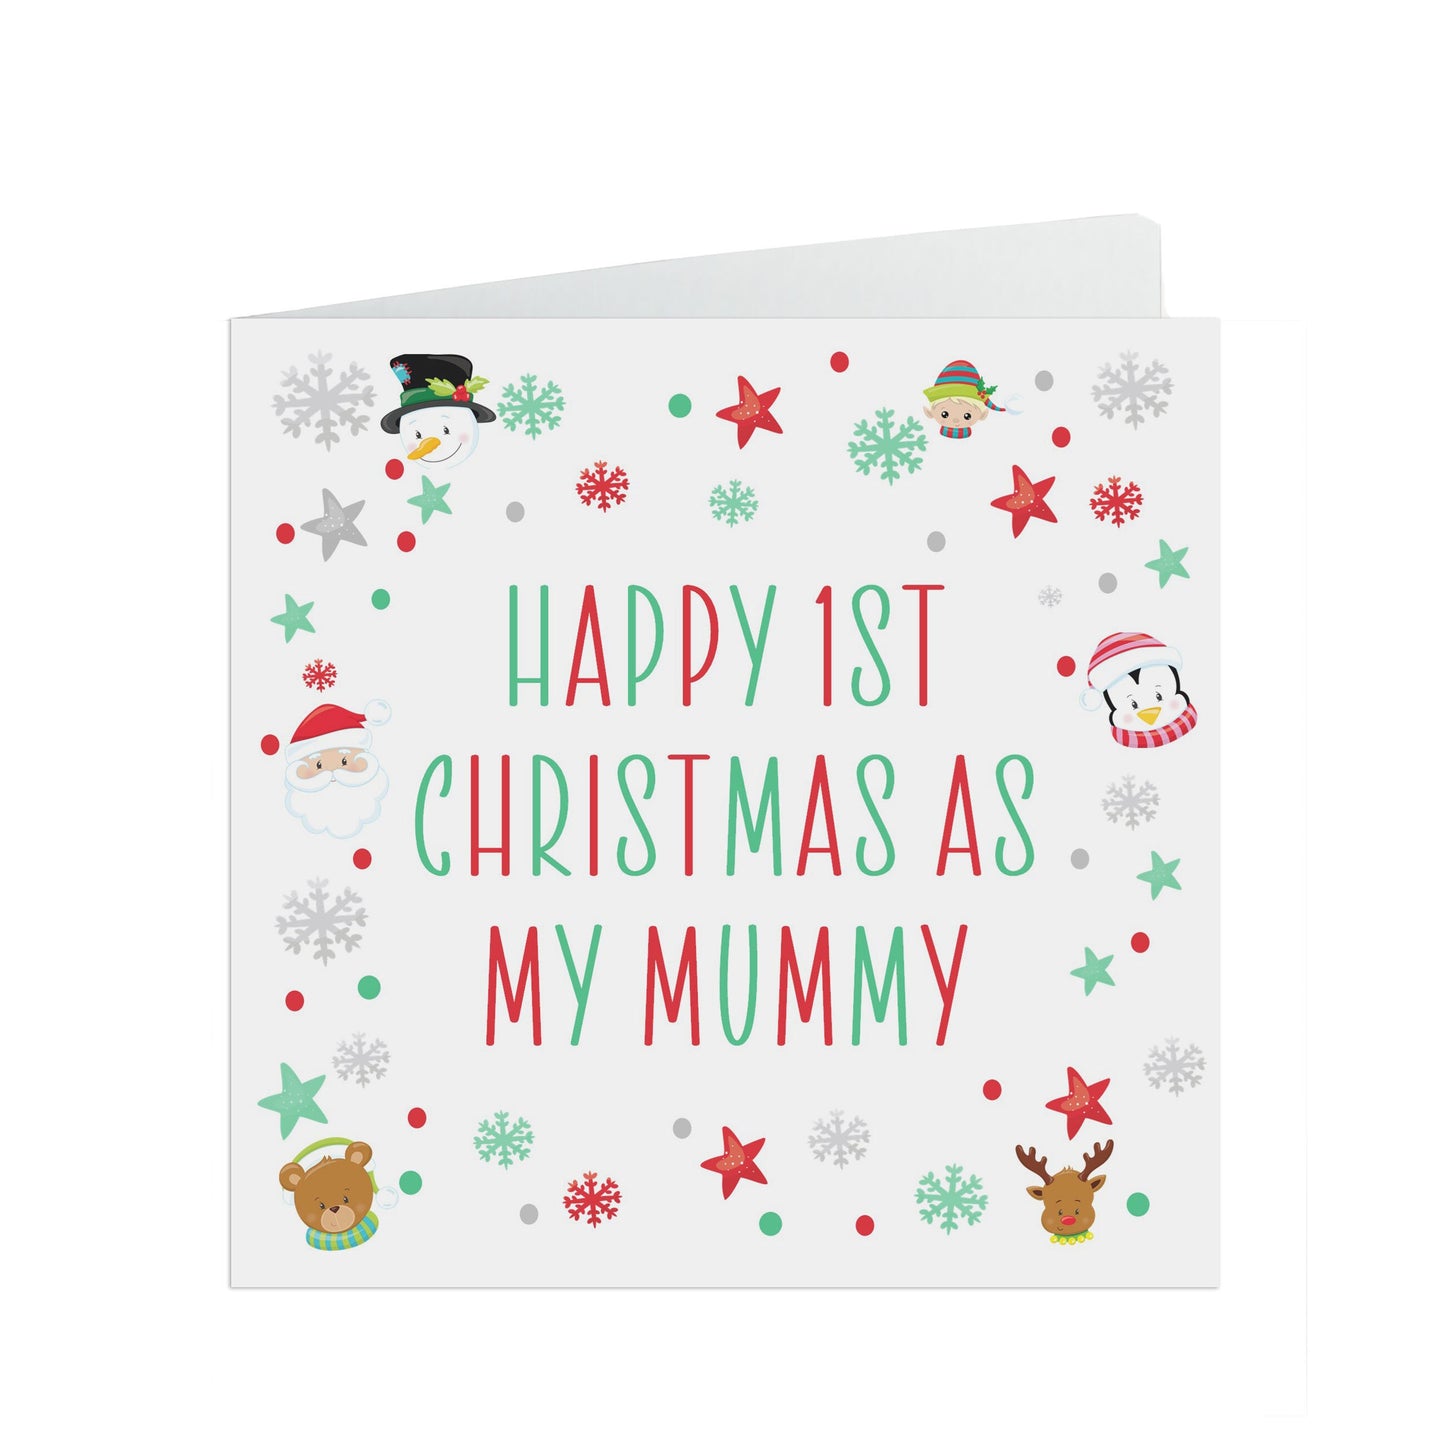 First Christmas As My Mummy, Colourful 1st Christmas Card From Son or Daughter